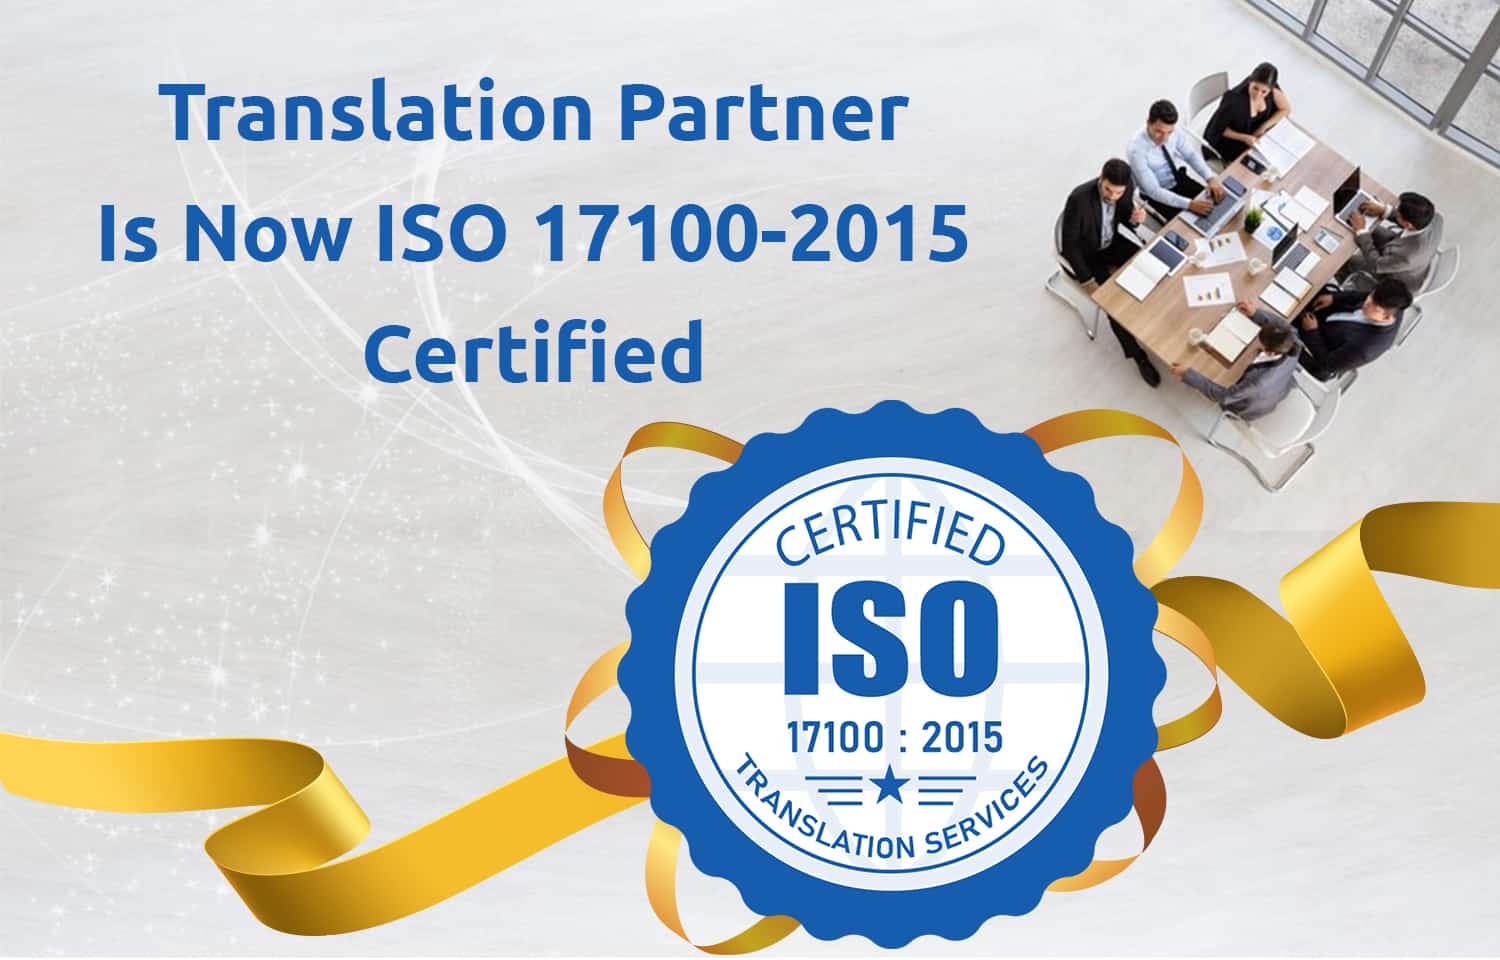 TranslationPartner is now ISO 17100-2015 Certified